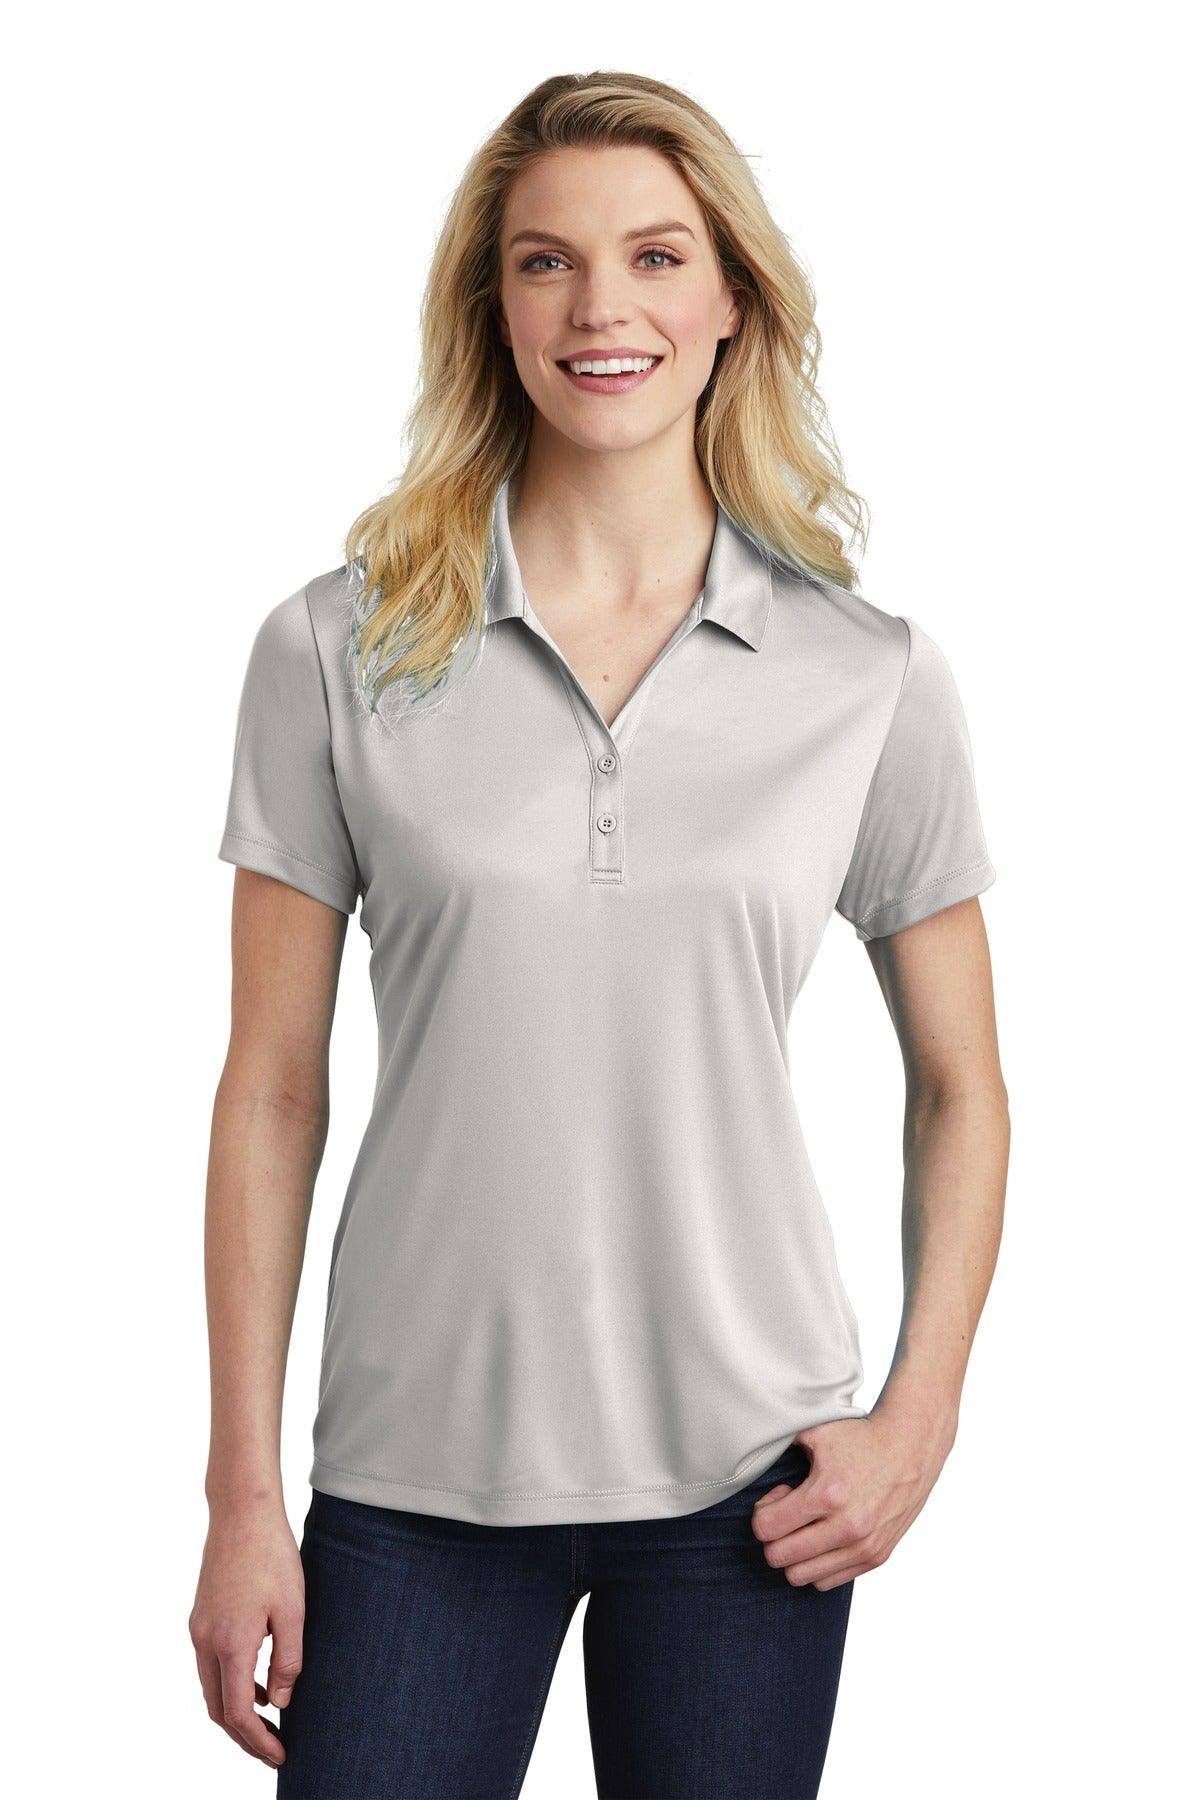 Sport-Tek Ladies PosiCharge Competitor Polo. LST550 - Dresses Max